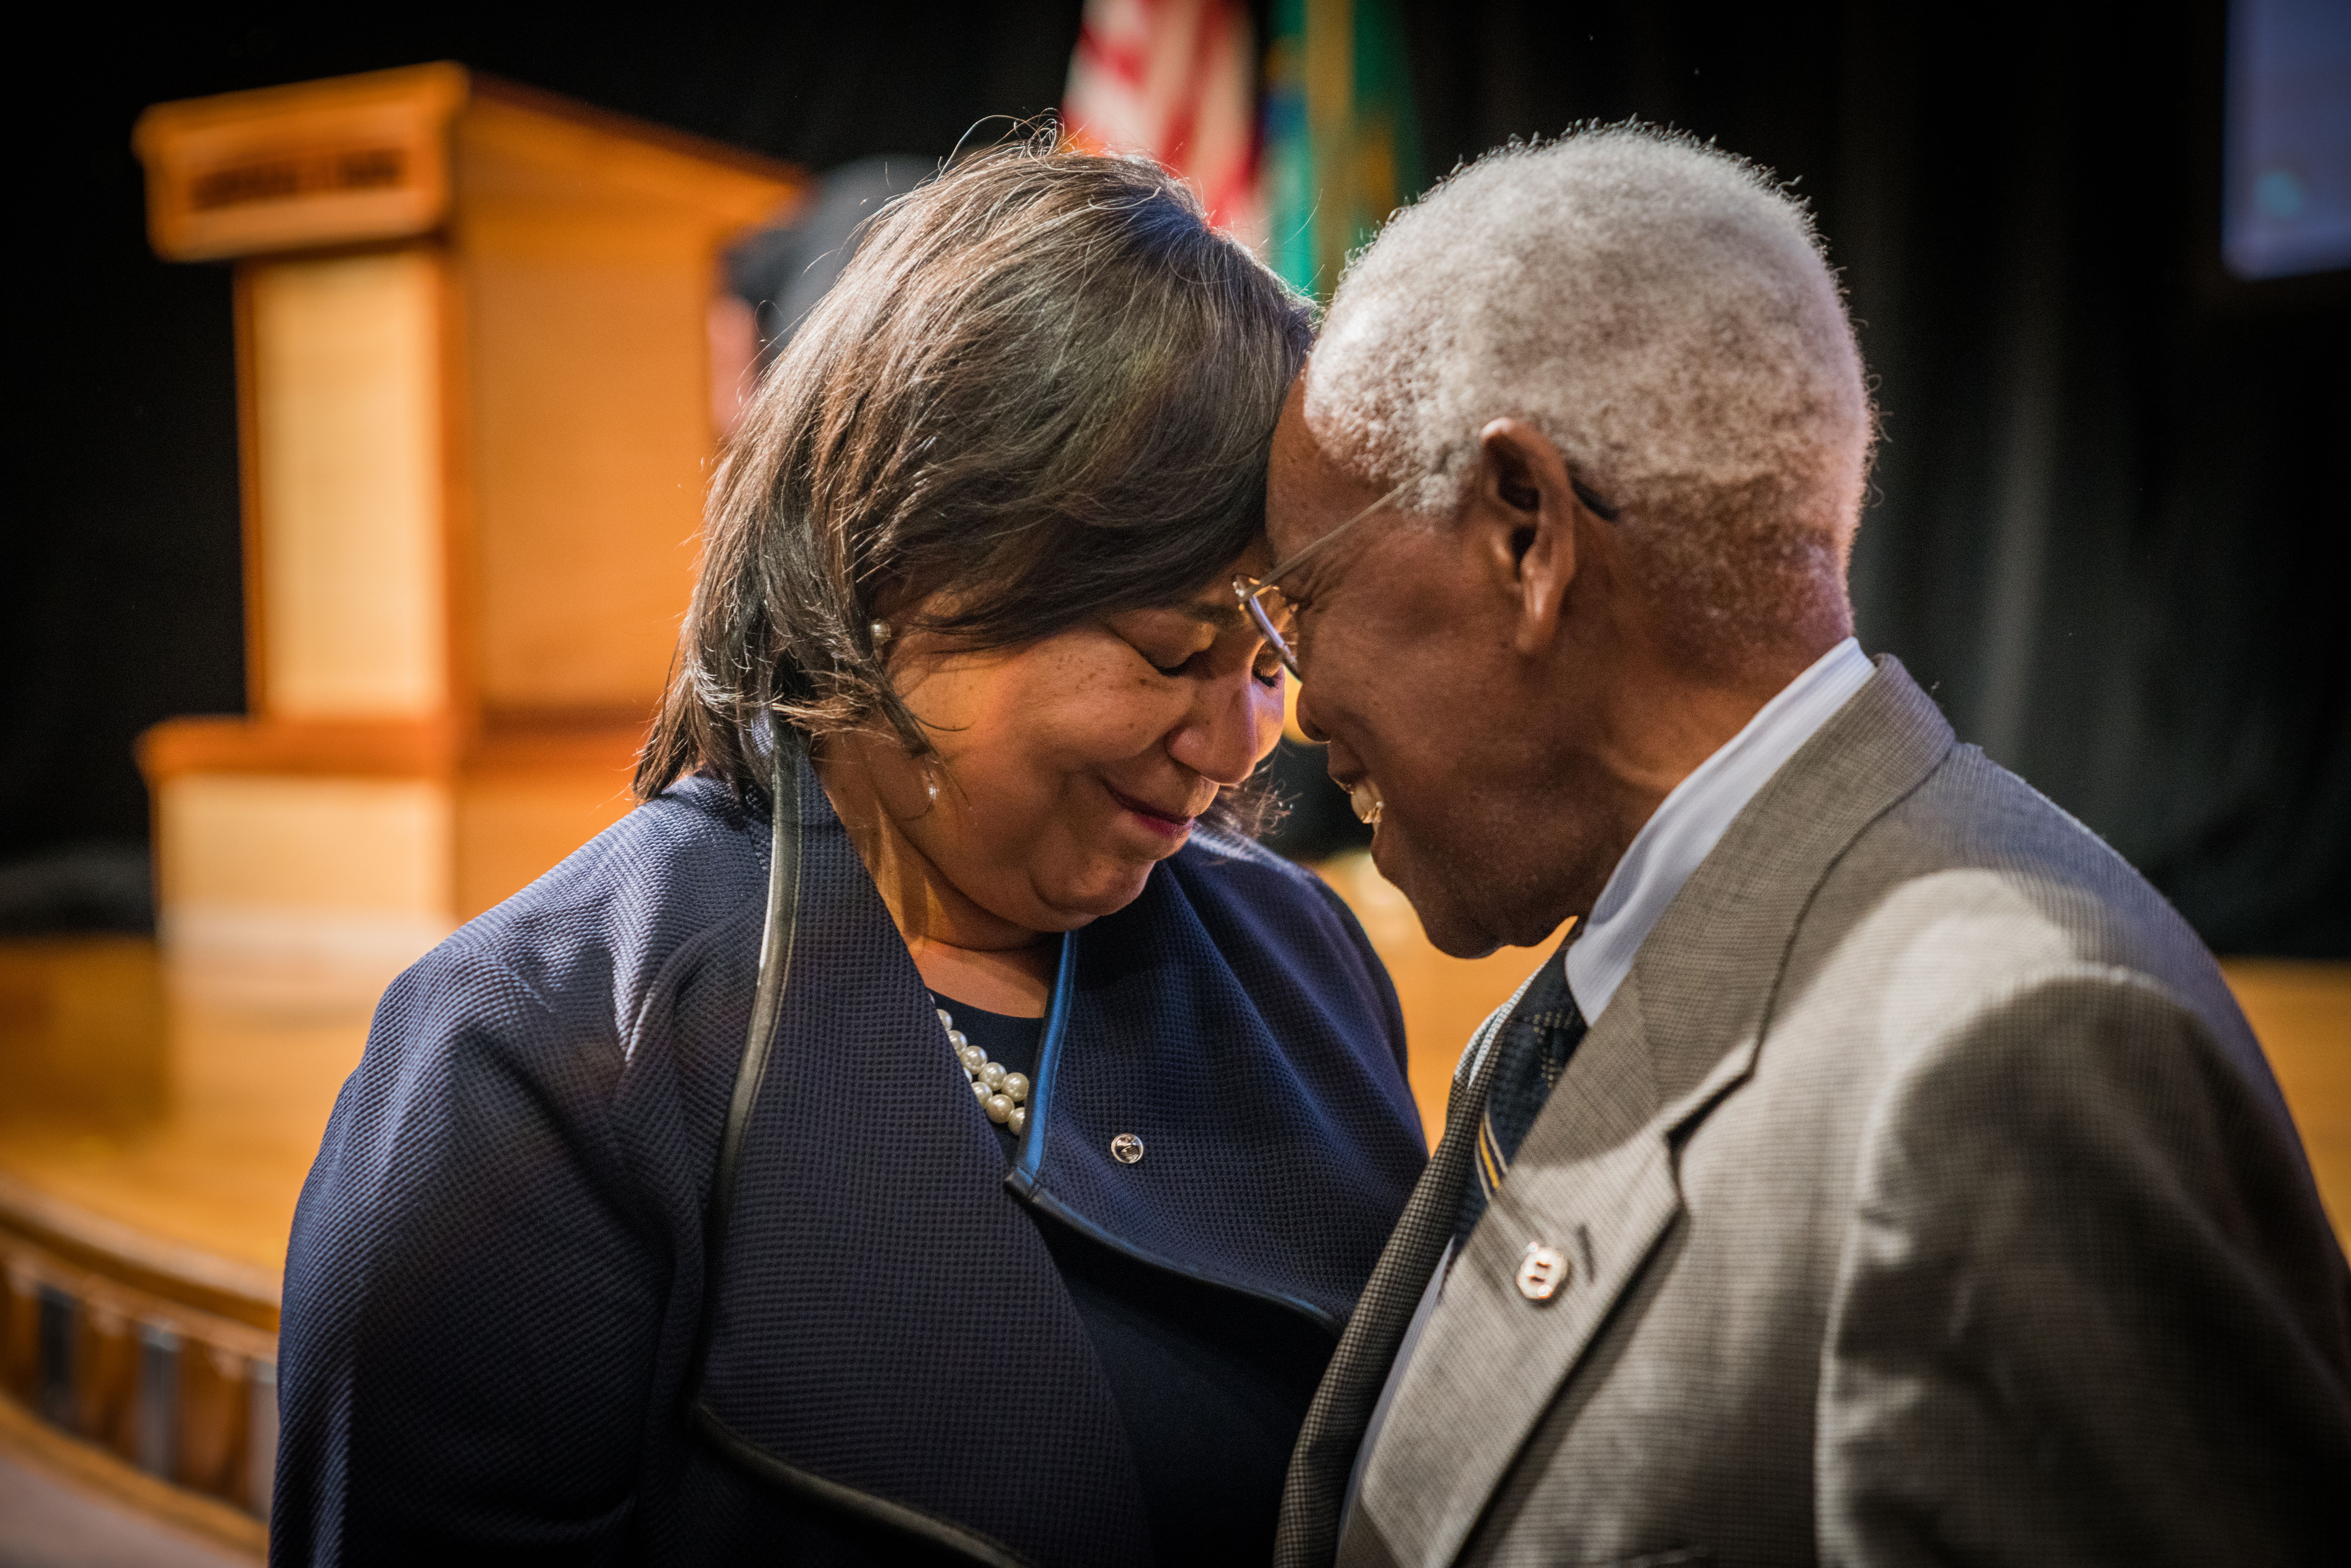 Mayor Victoria Woodards pauses to share a quiet moment with former Mayor Harold G. Moss after her first State of the City Address on April 11, 2018 at Lincoln High School in Tacoma, Washington. -- Courtesy of City of Tacoma